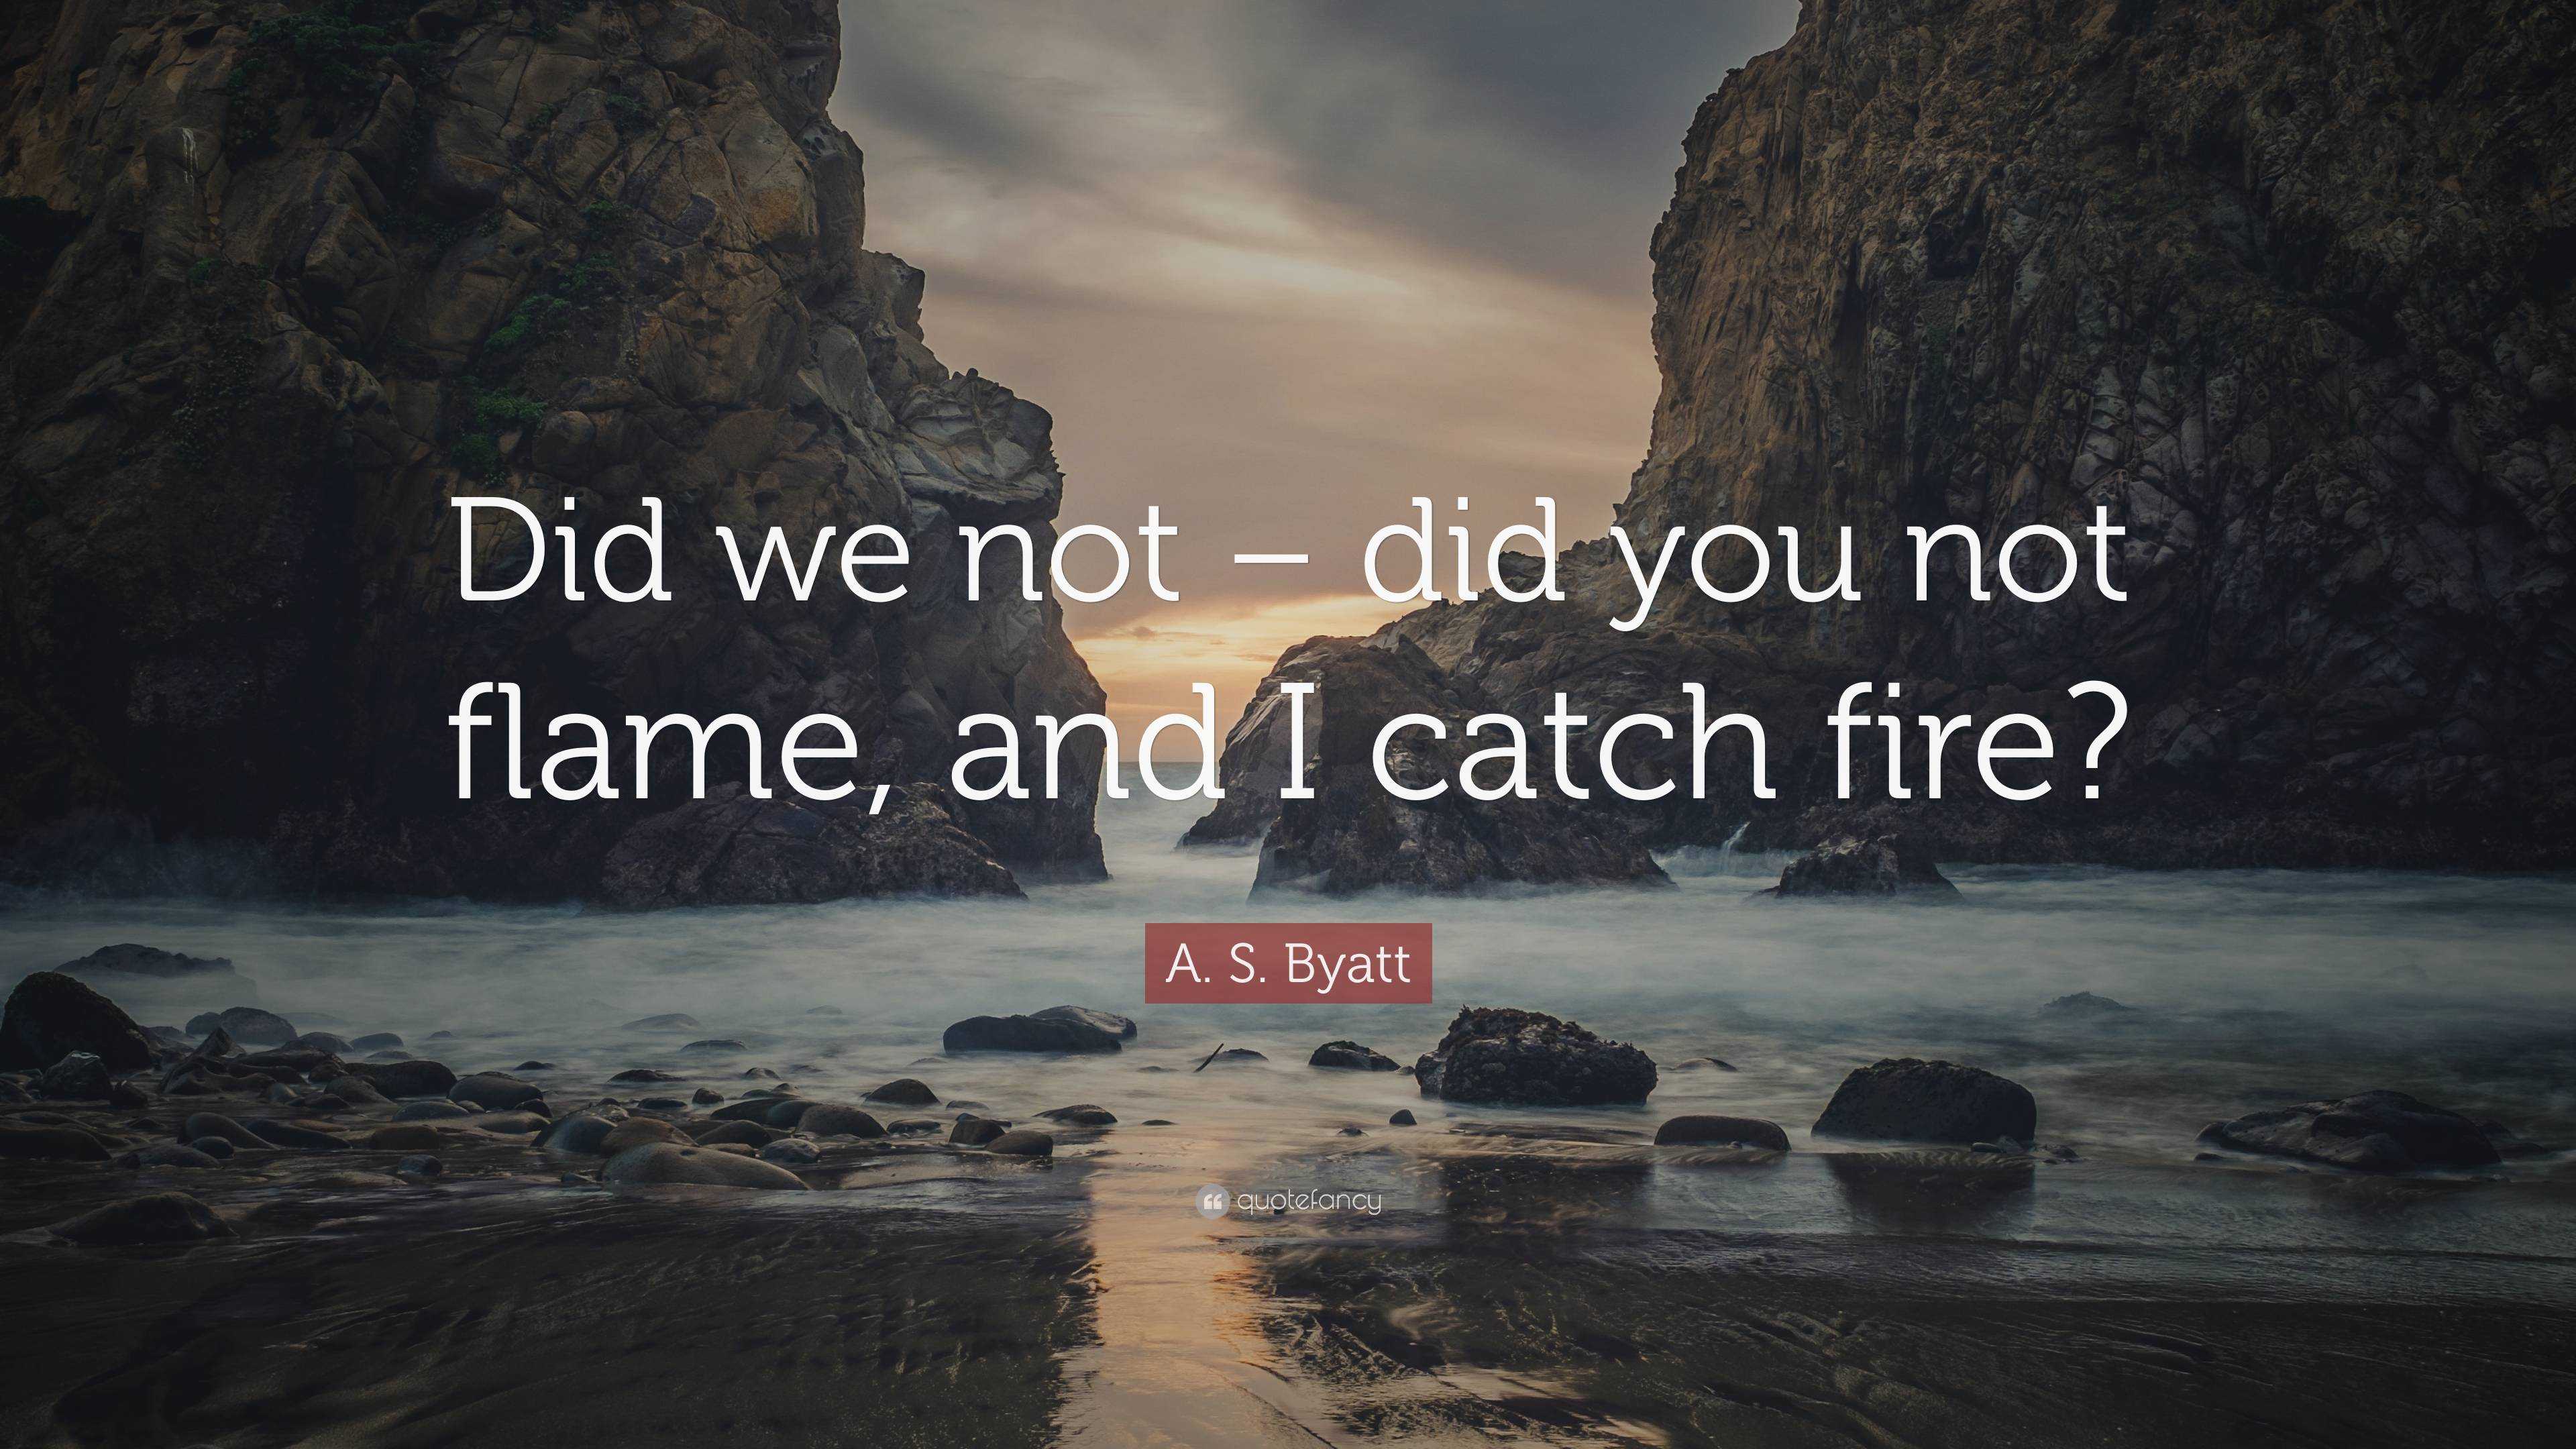 A. S. Byatt Quote: “Did we not – did you not flame, and I catch fire?”